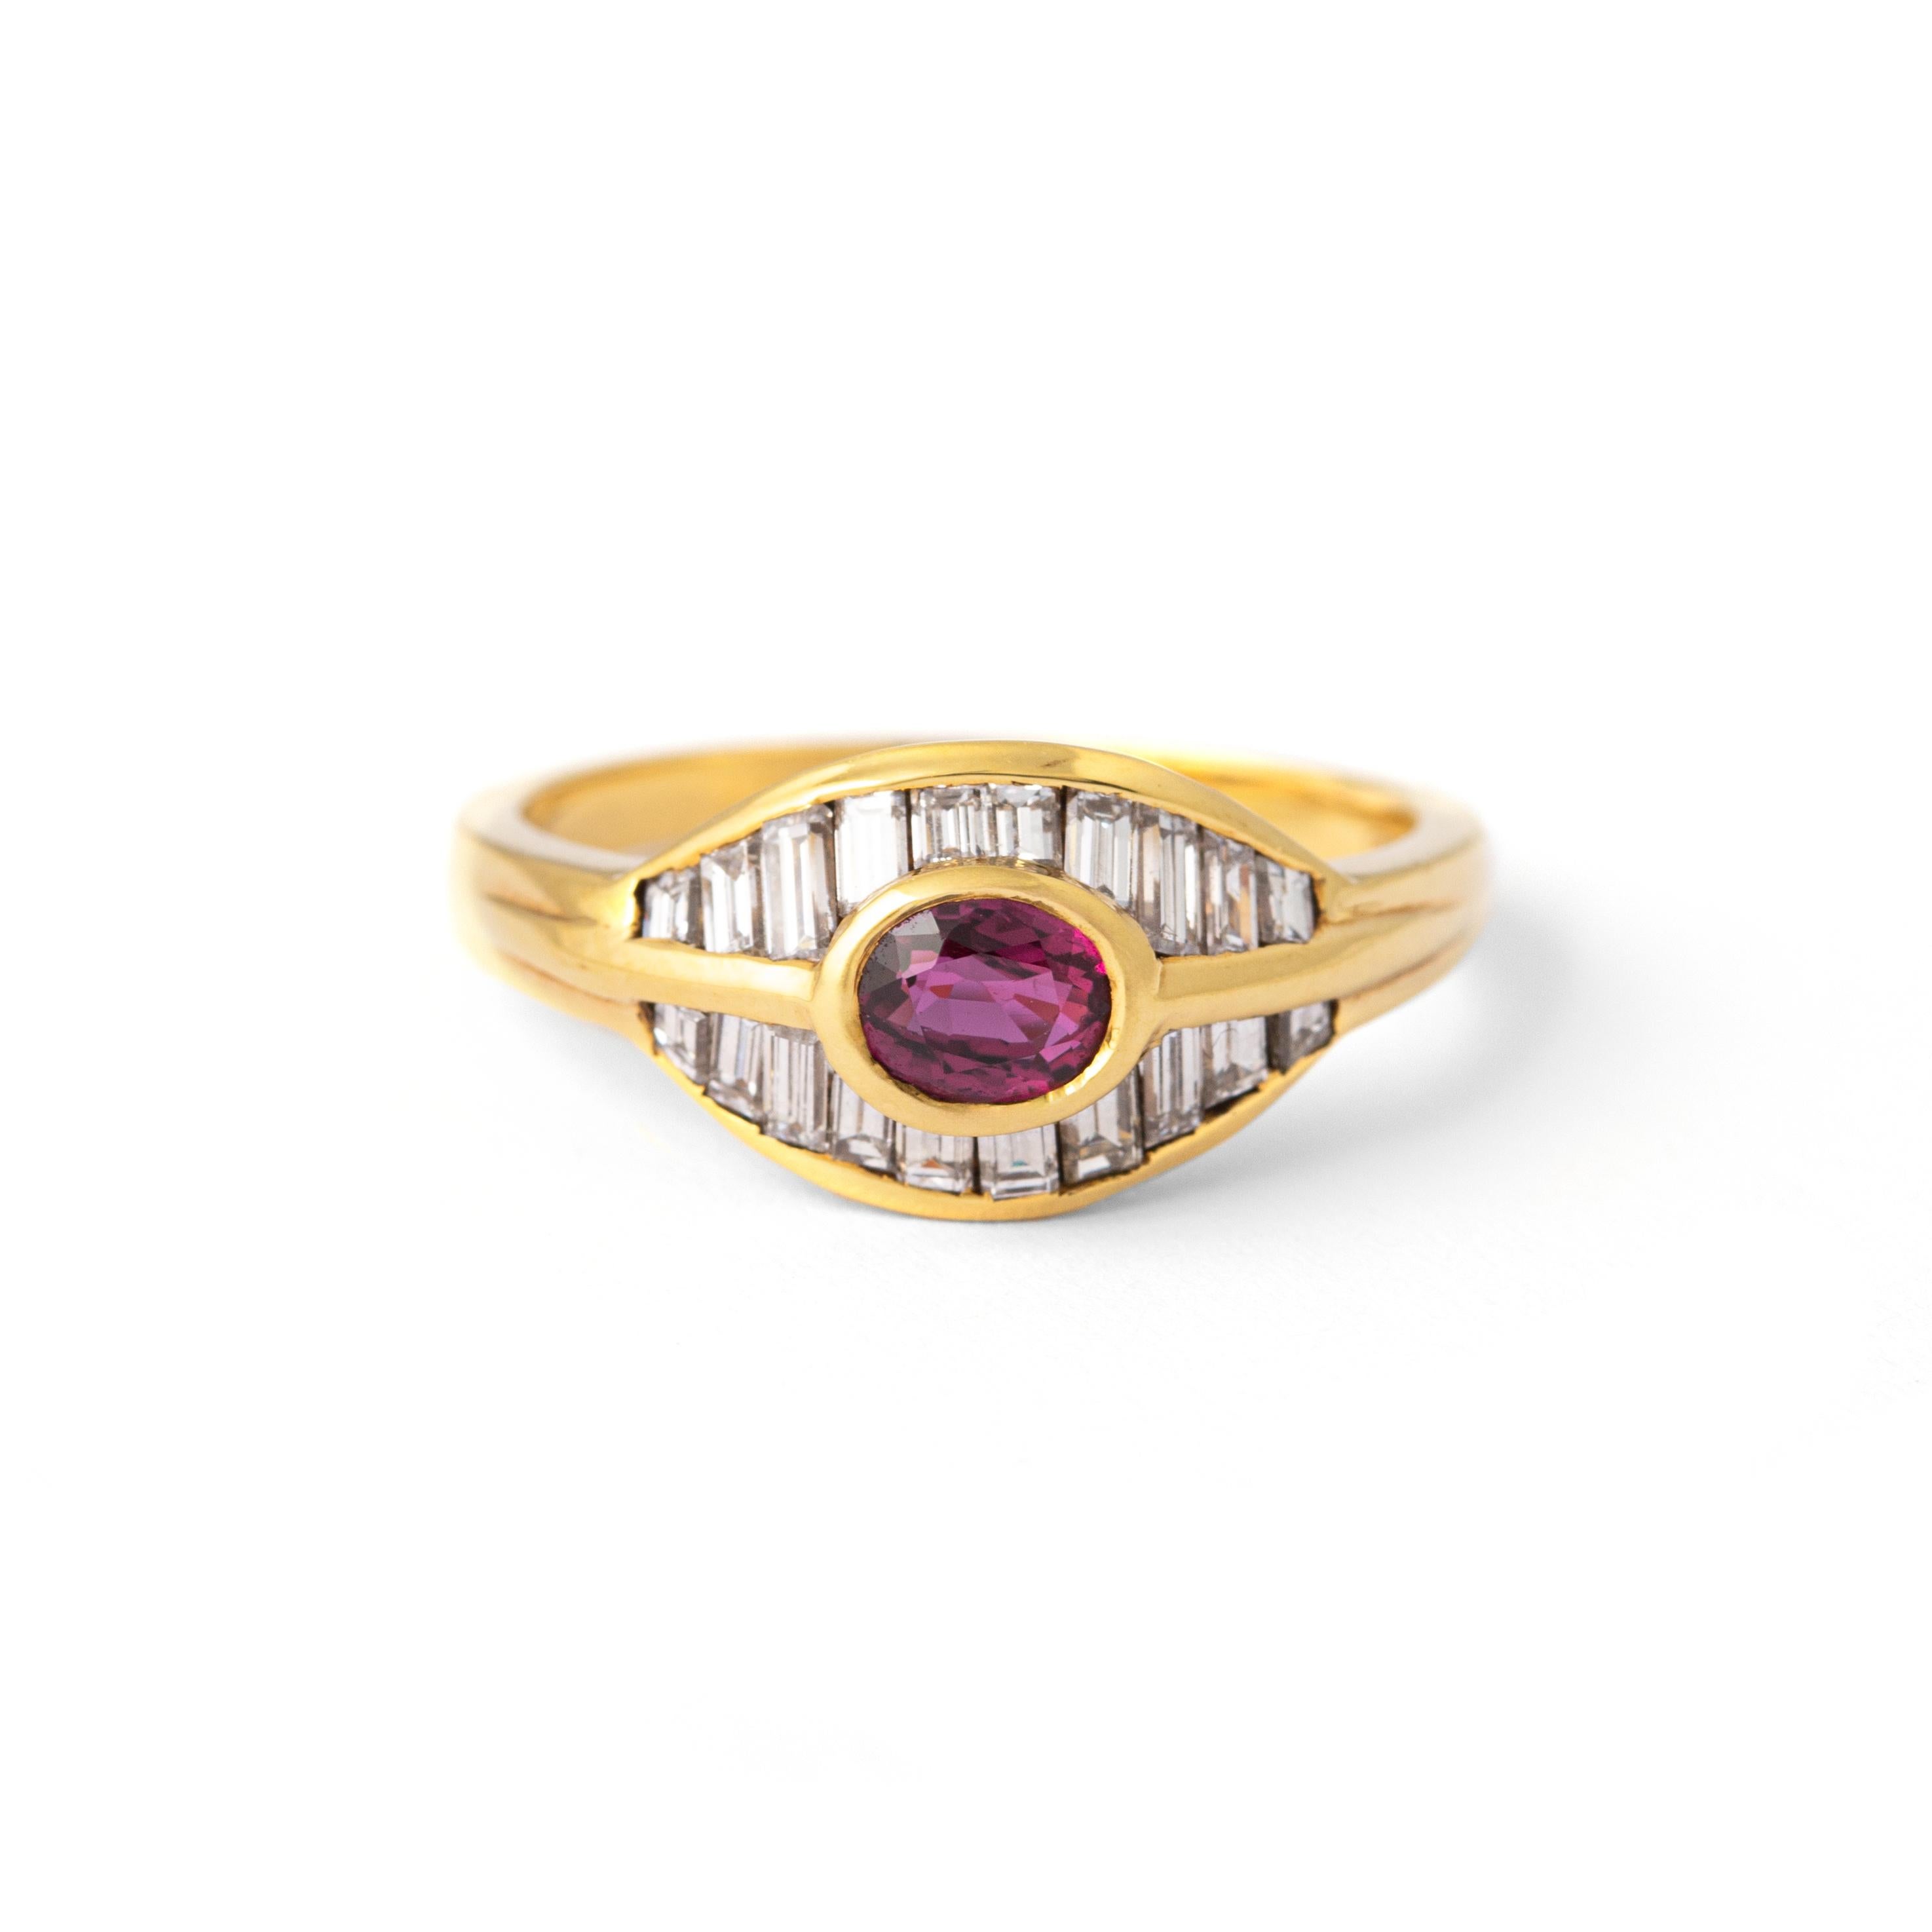 Ruby and Diamond Yellow Gold 18K Ring
Centered by an oval Ruby of 0.54 carat and 20 Diamond of 0,69 carat total estimated F color and VVS2 clarity .

Size: 6.5
Total weight: 4.06 grams.
